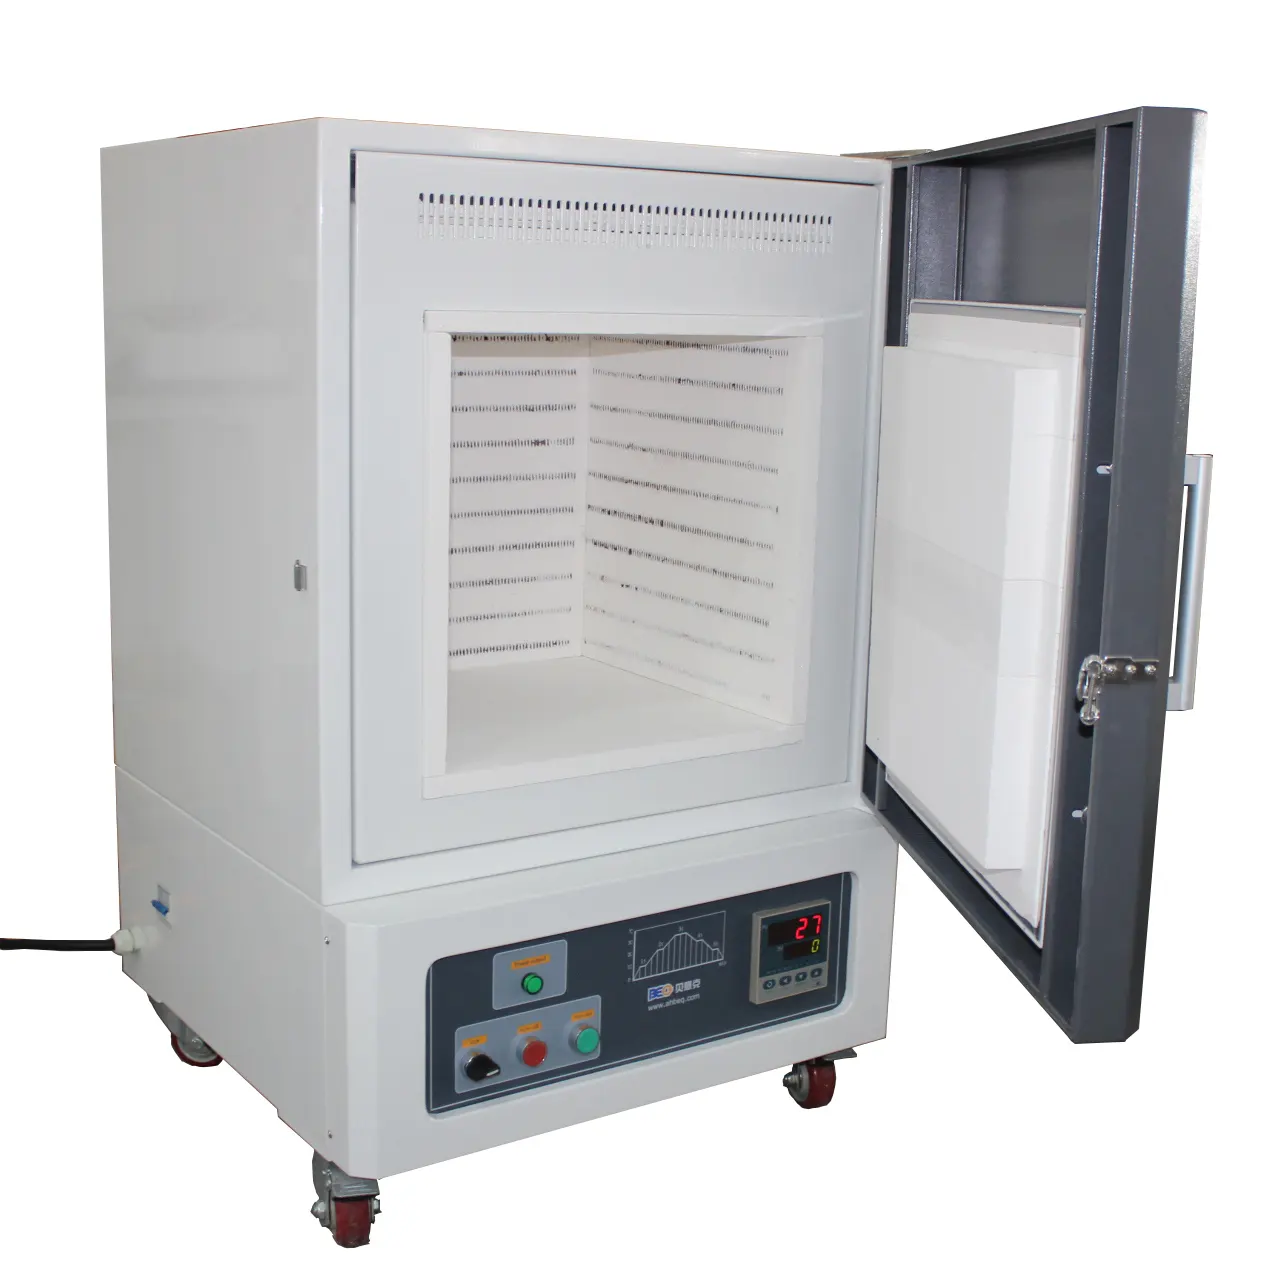 1200 degree Lab high temperature Ceramic oven Muffle Furnace for Jewelry Casting burnout